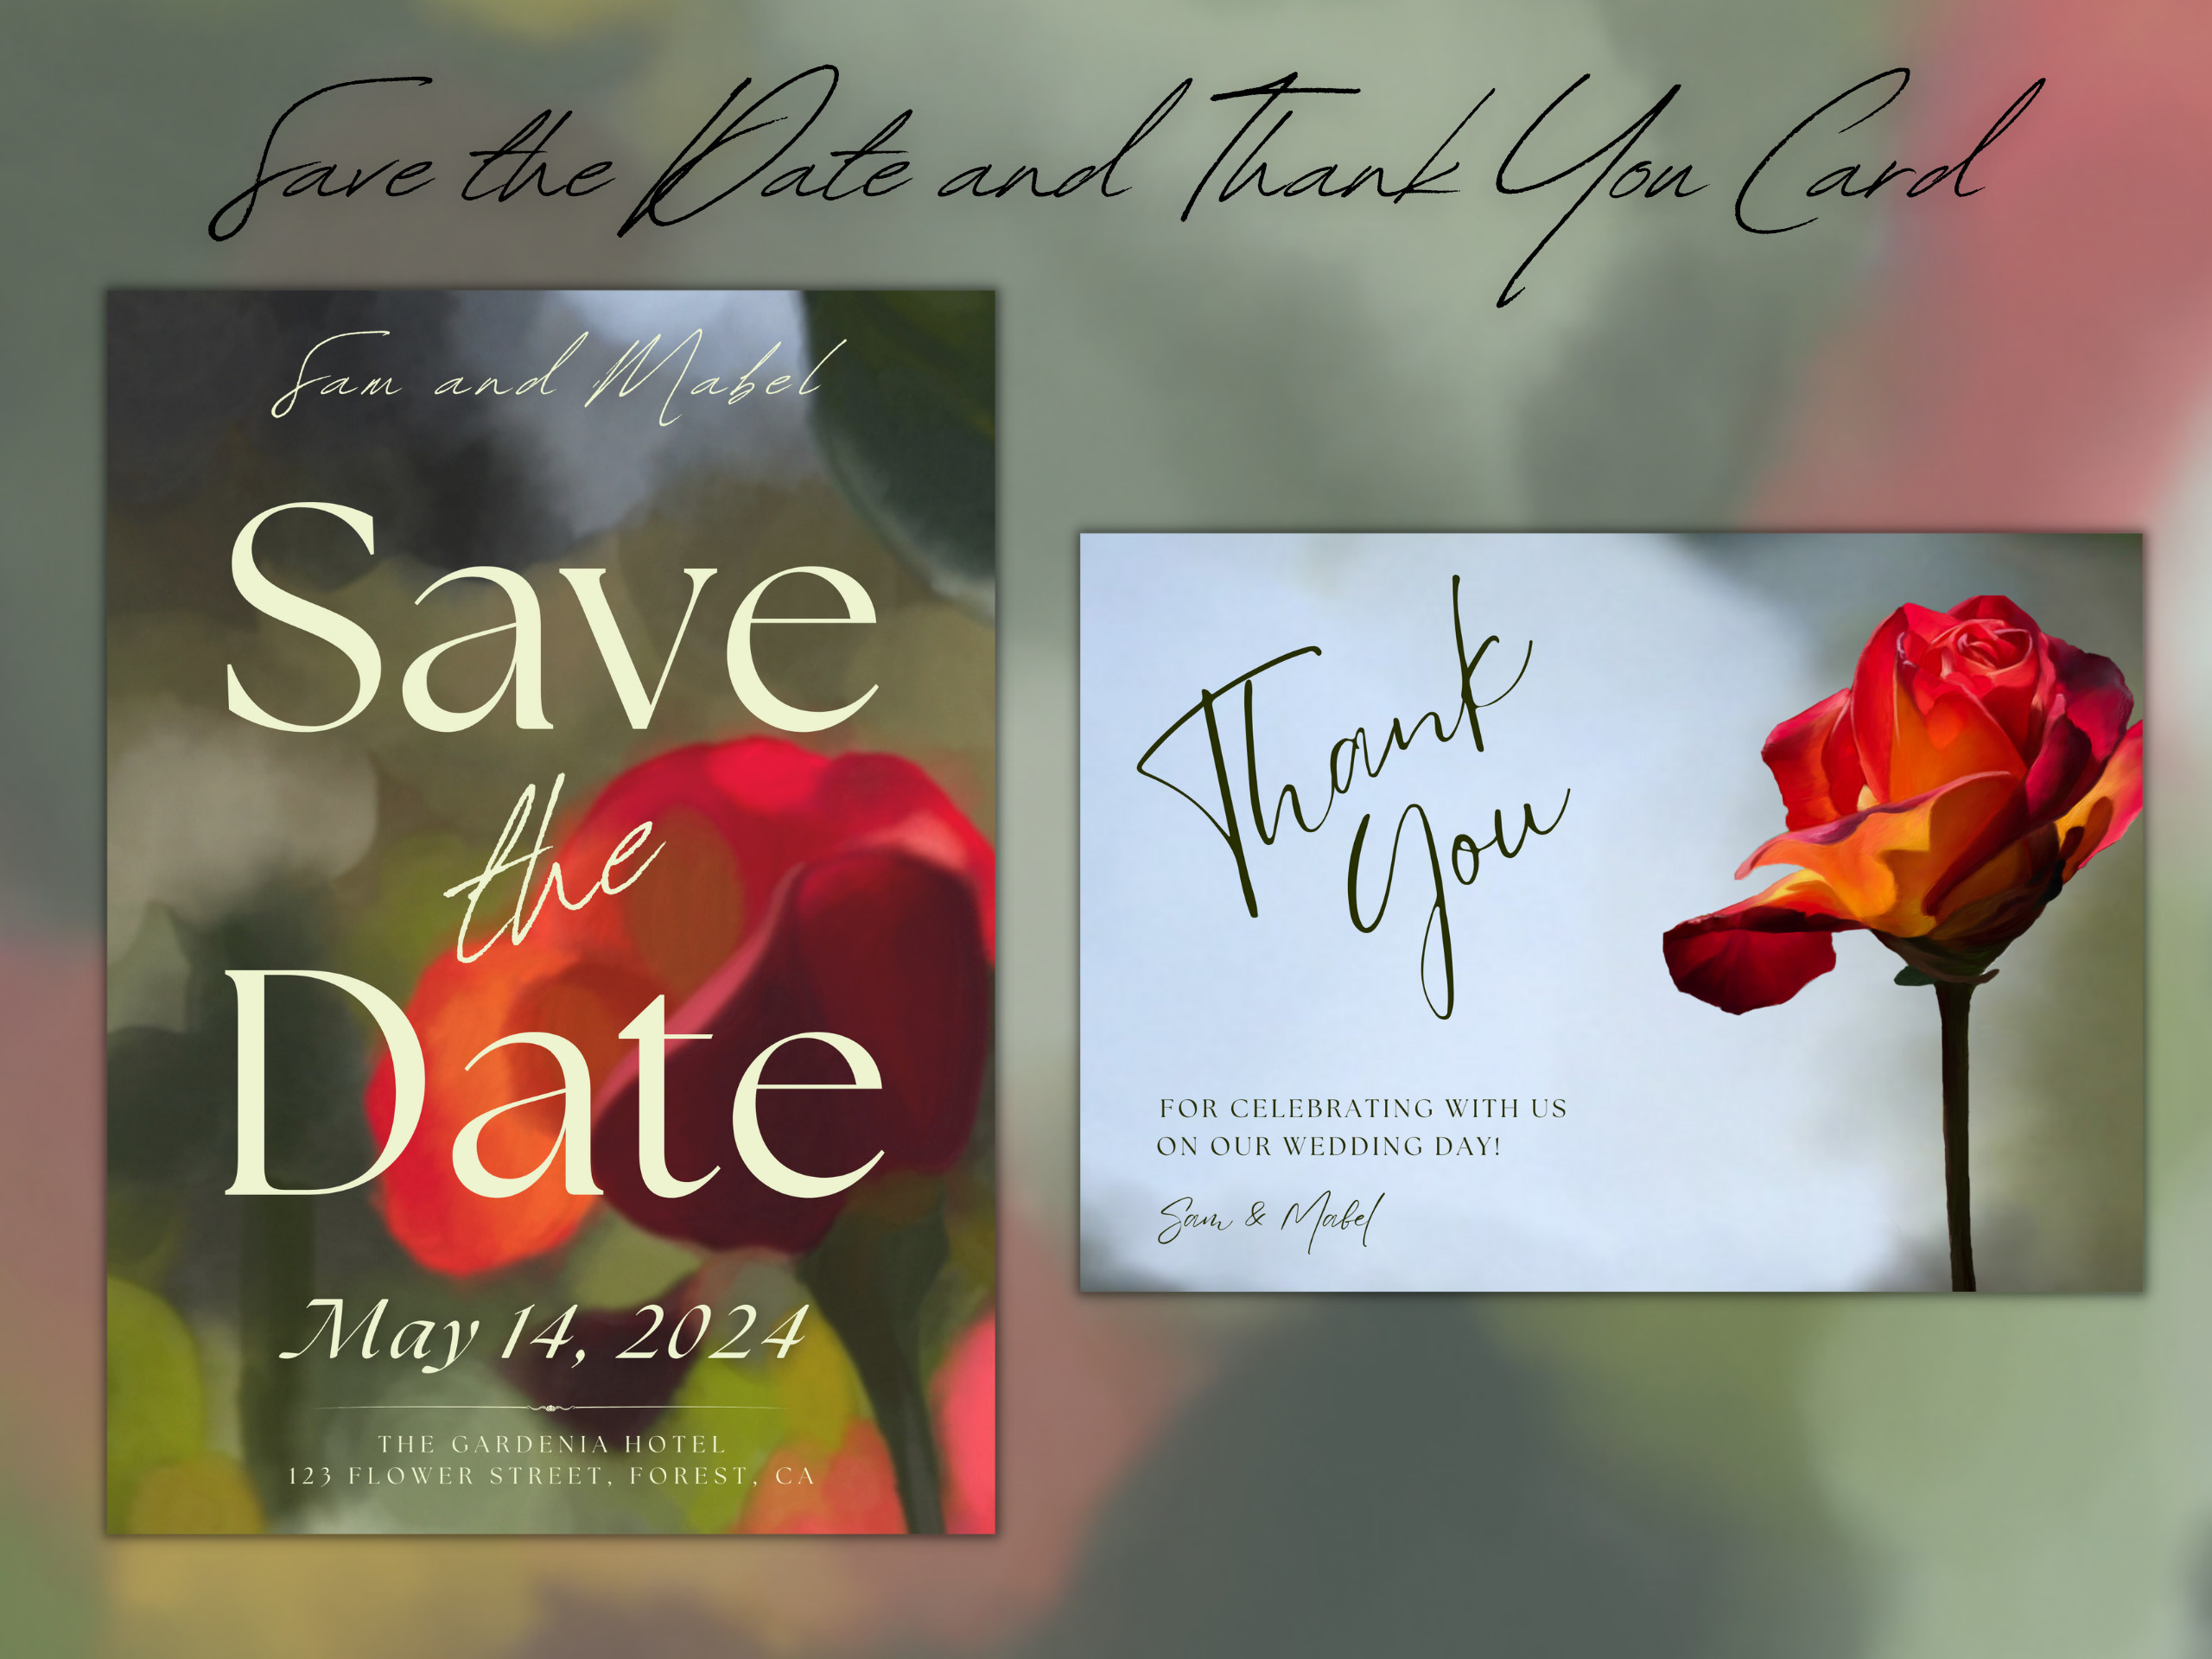 Save the Date and Thank you card.